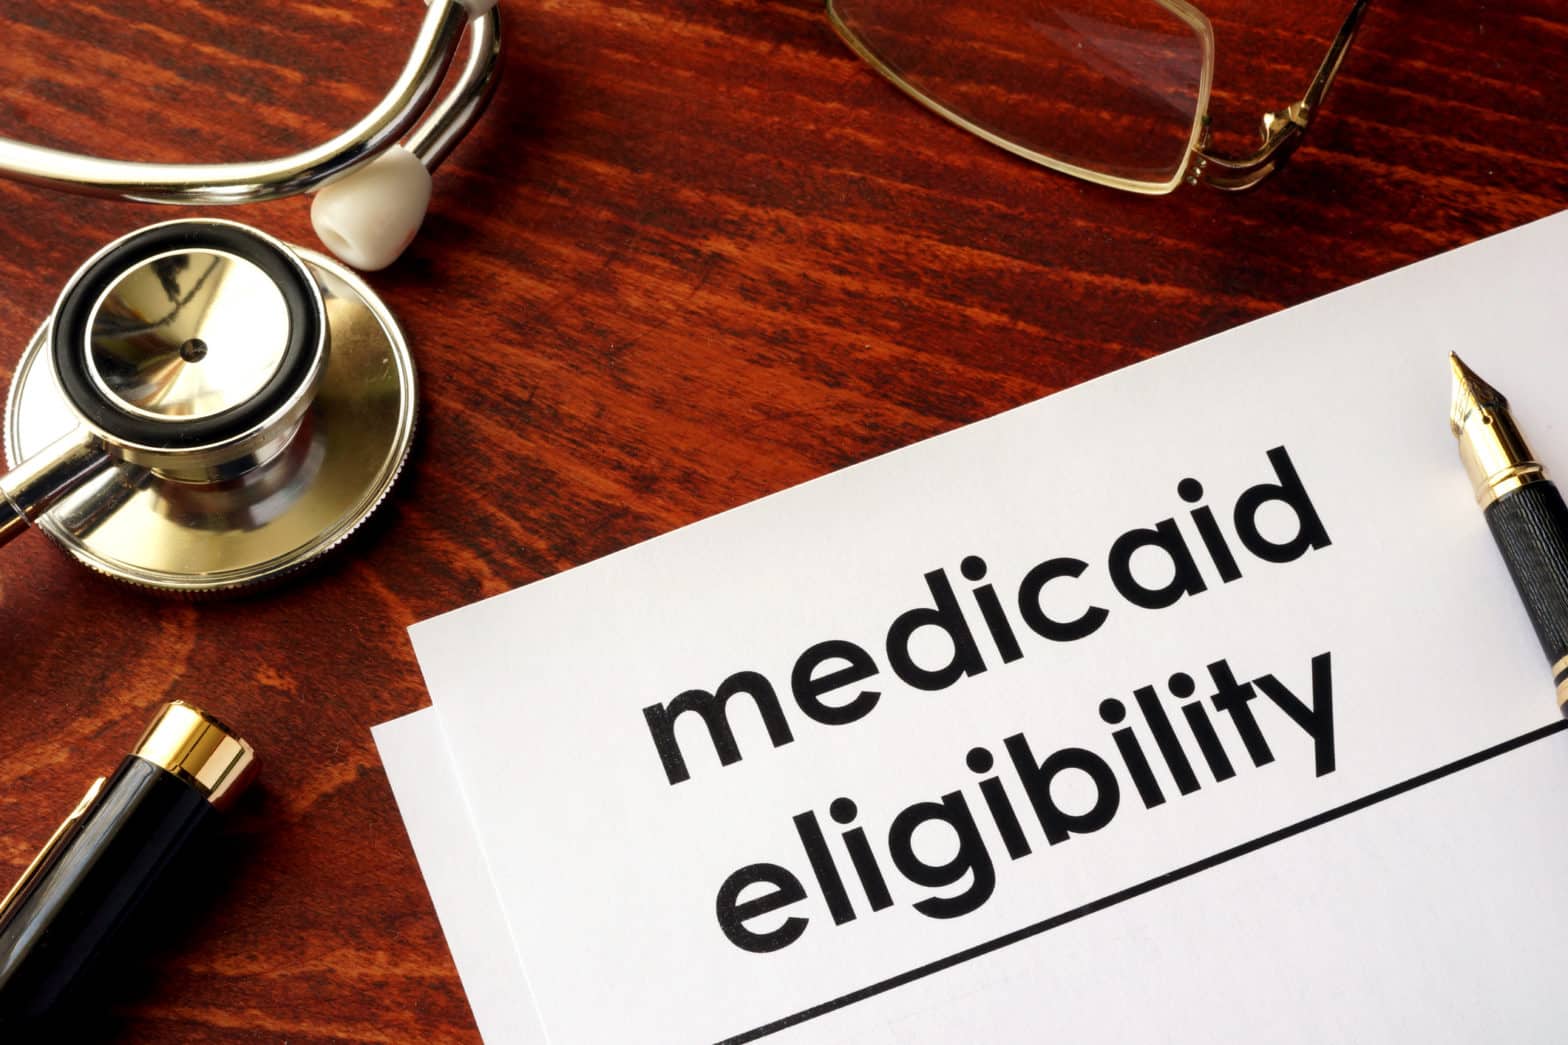 Document with title medicaid eligibility.